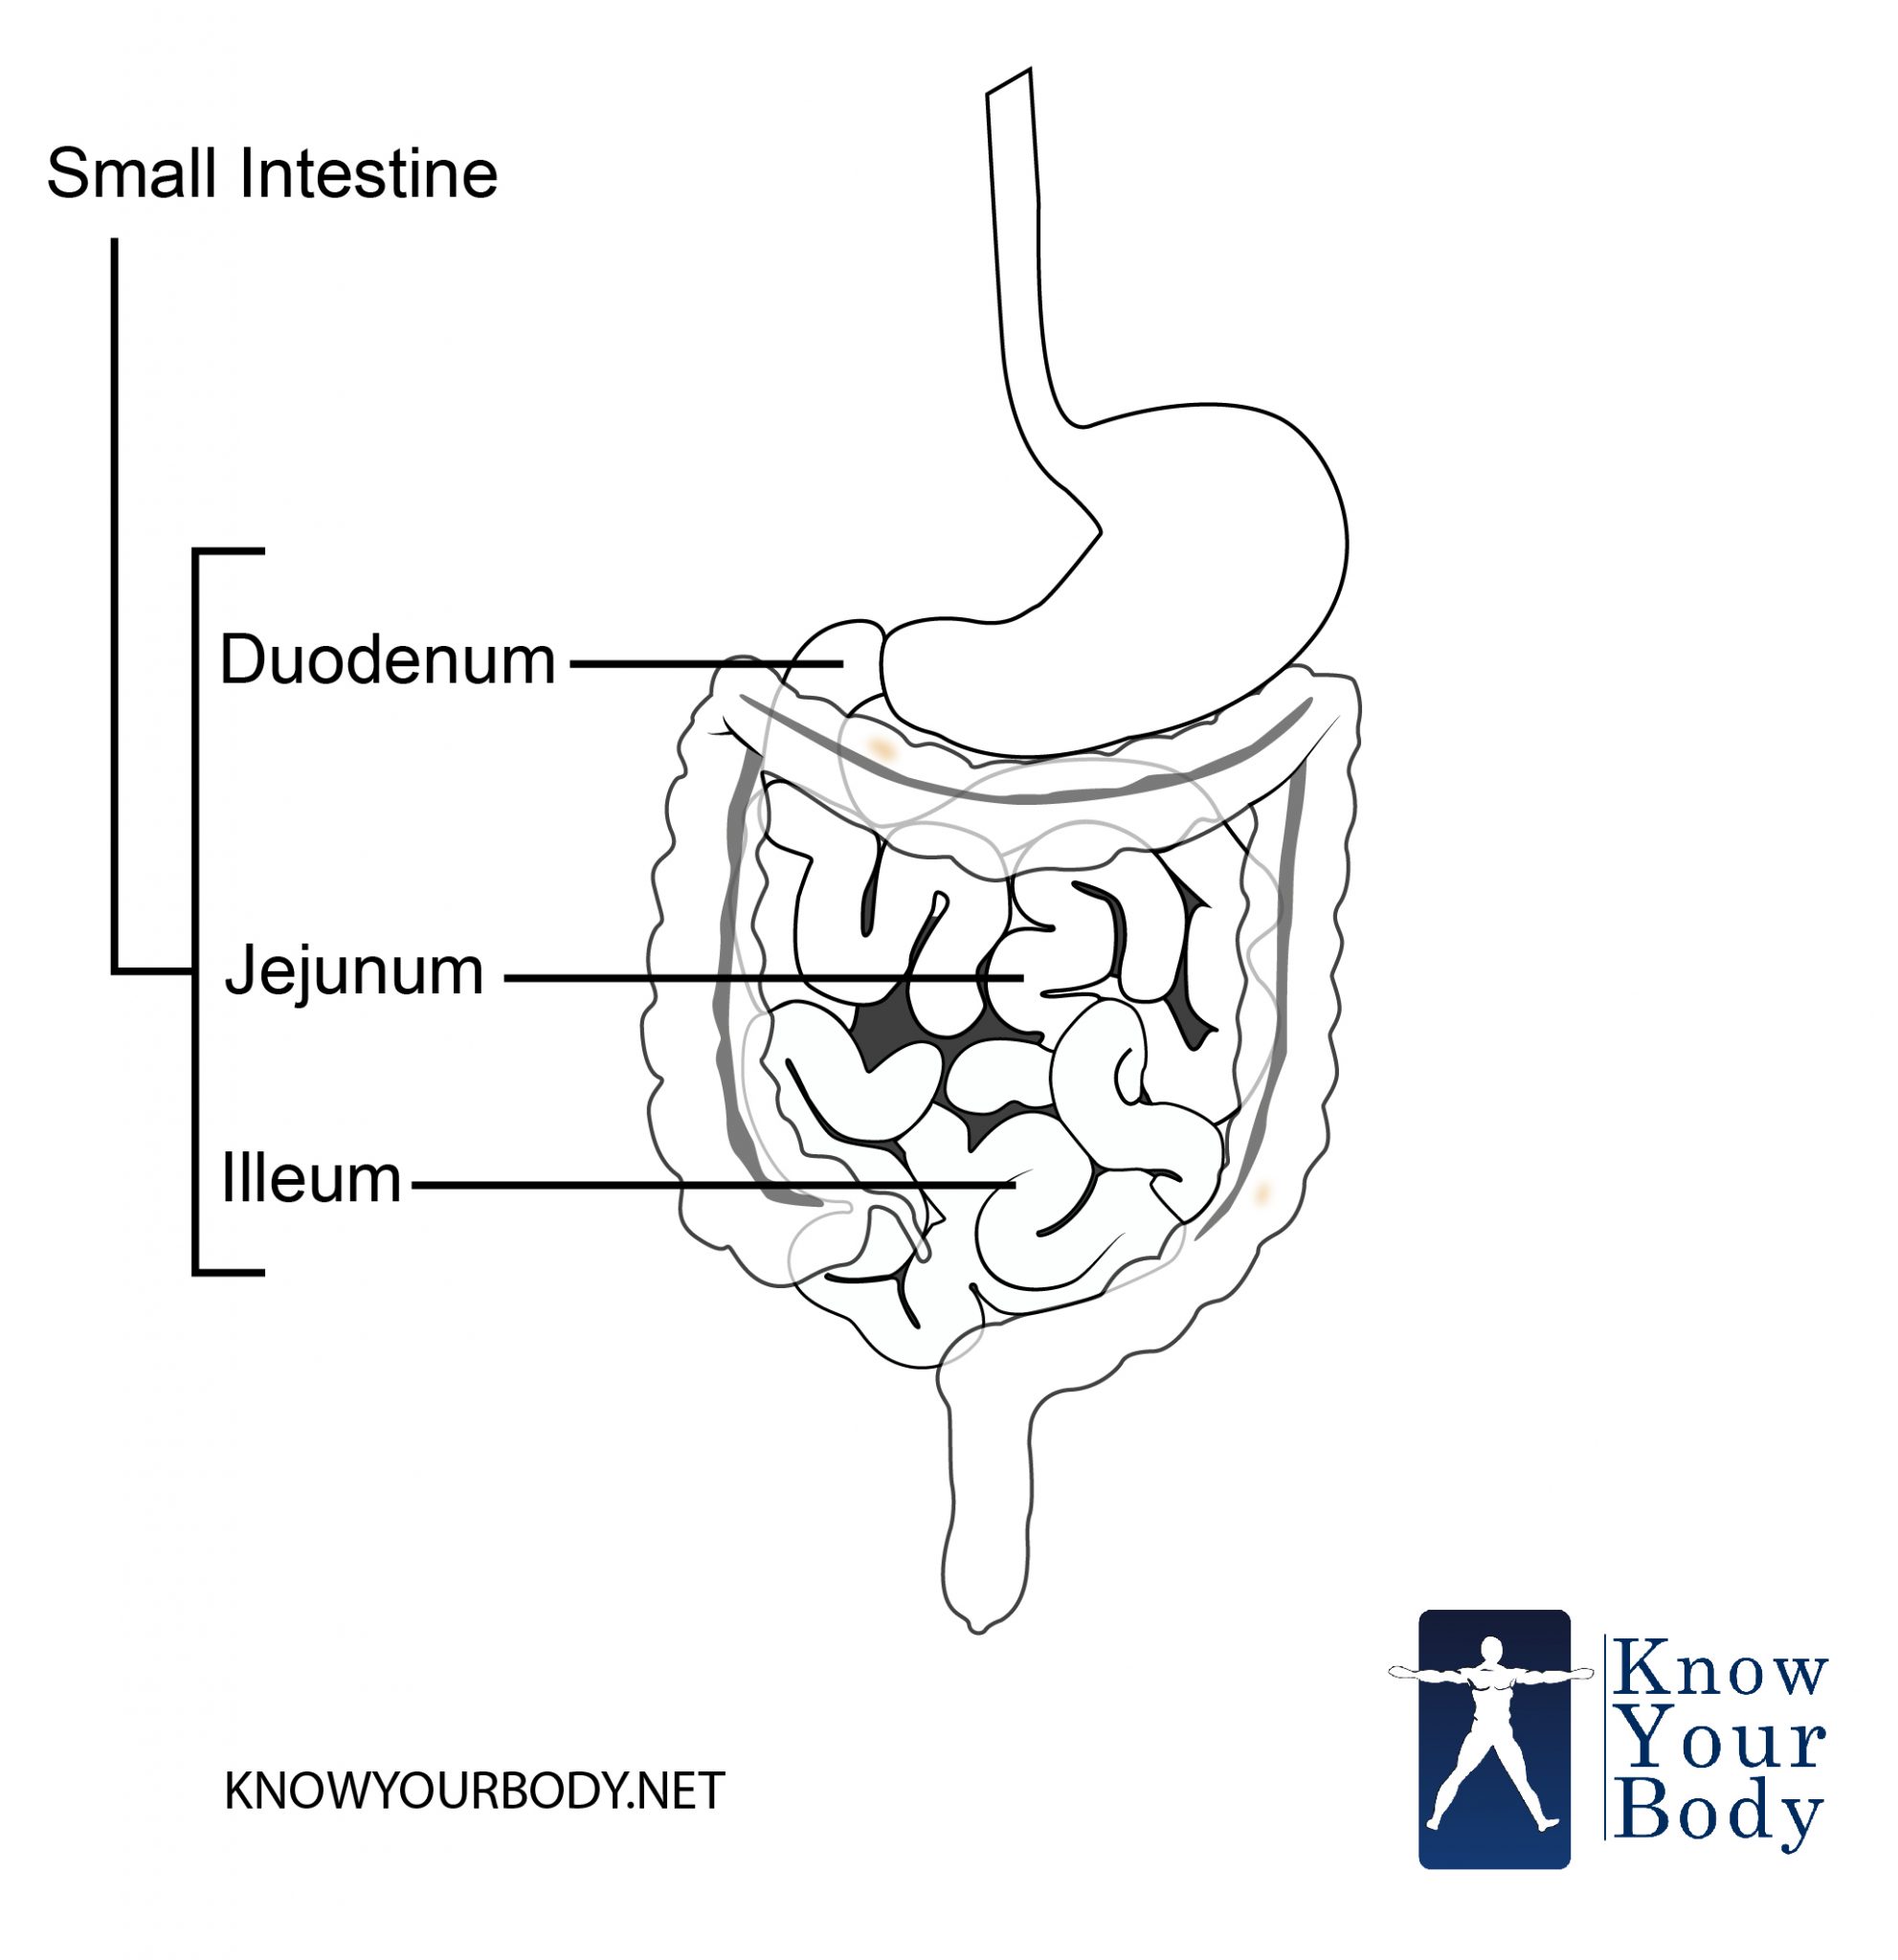 Small Intestine Function, Anatomy, Location, Length and Diagram